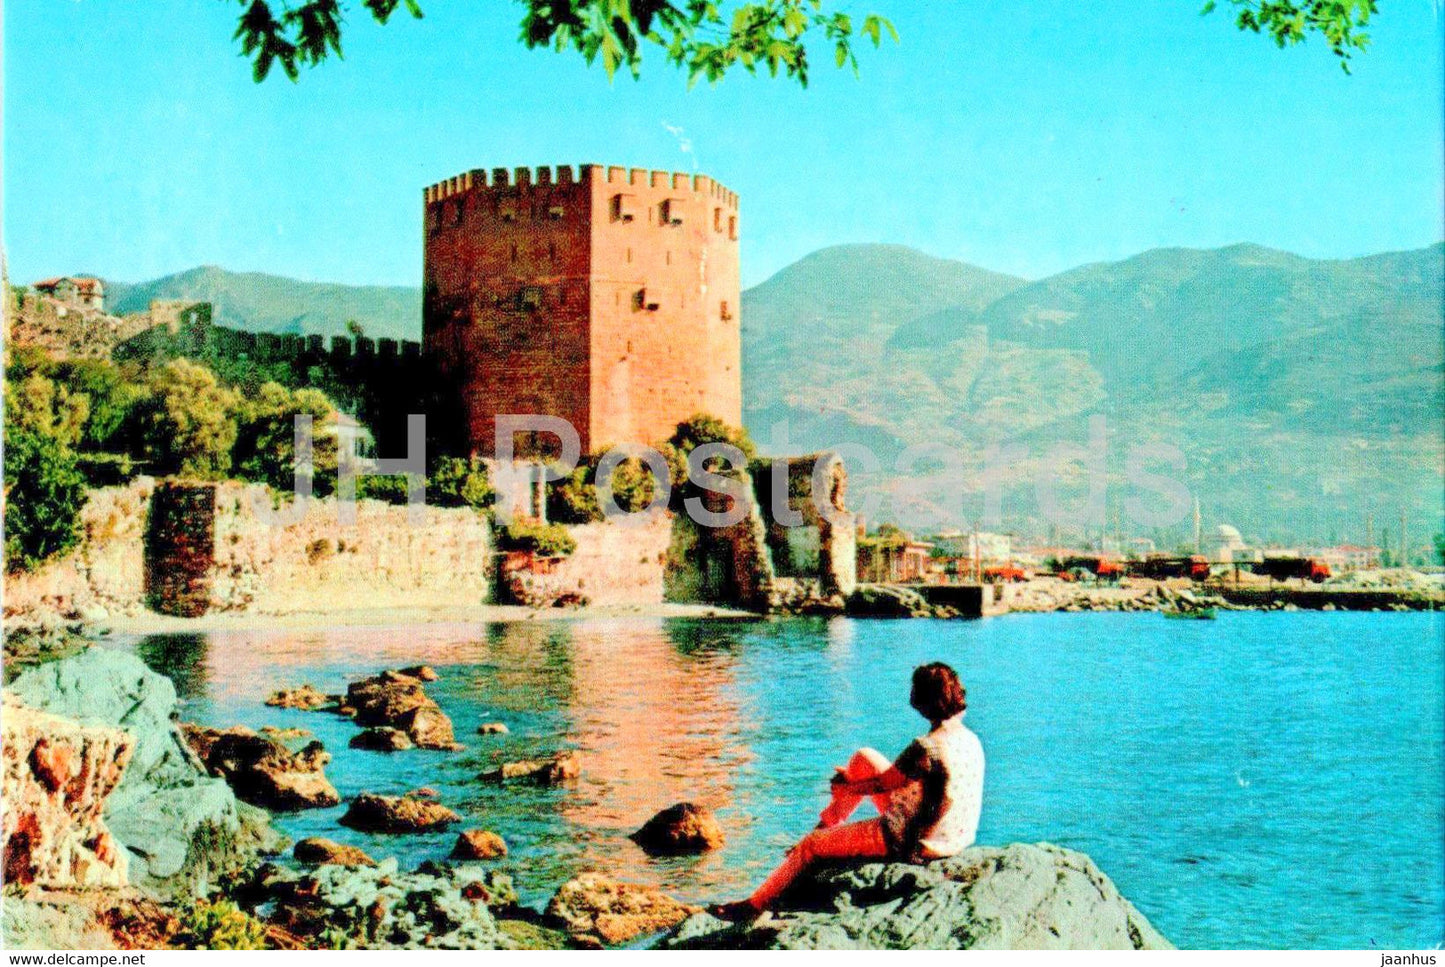 Alanya - A view of the Castle - 07-61 - Turkey - unused - JH Postcards